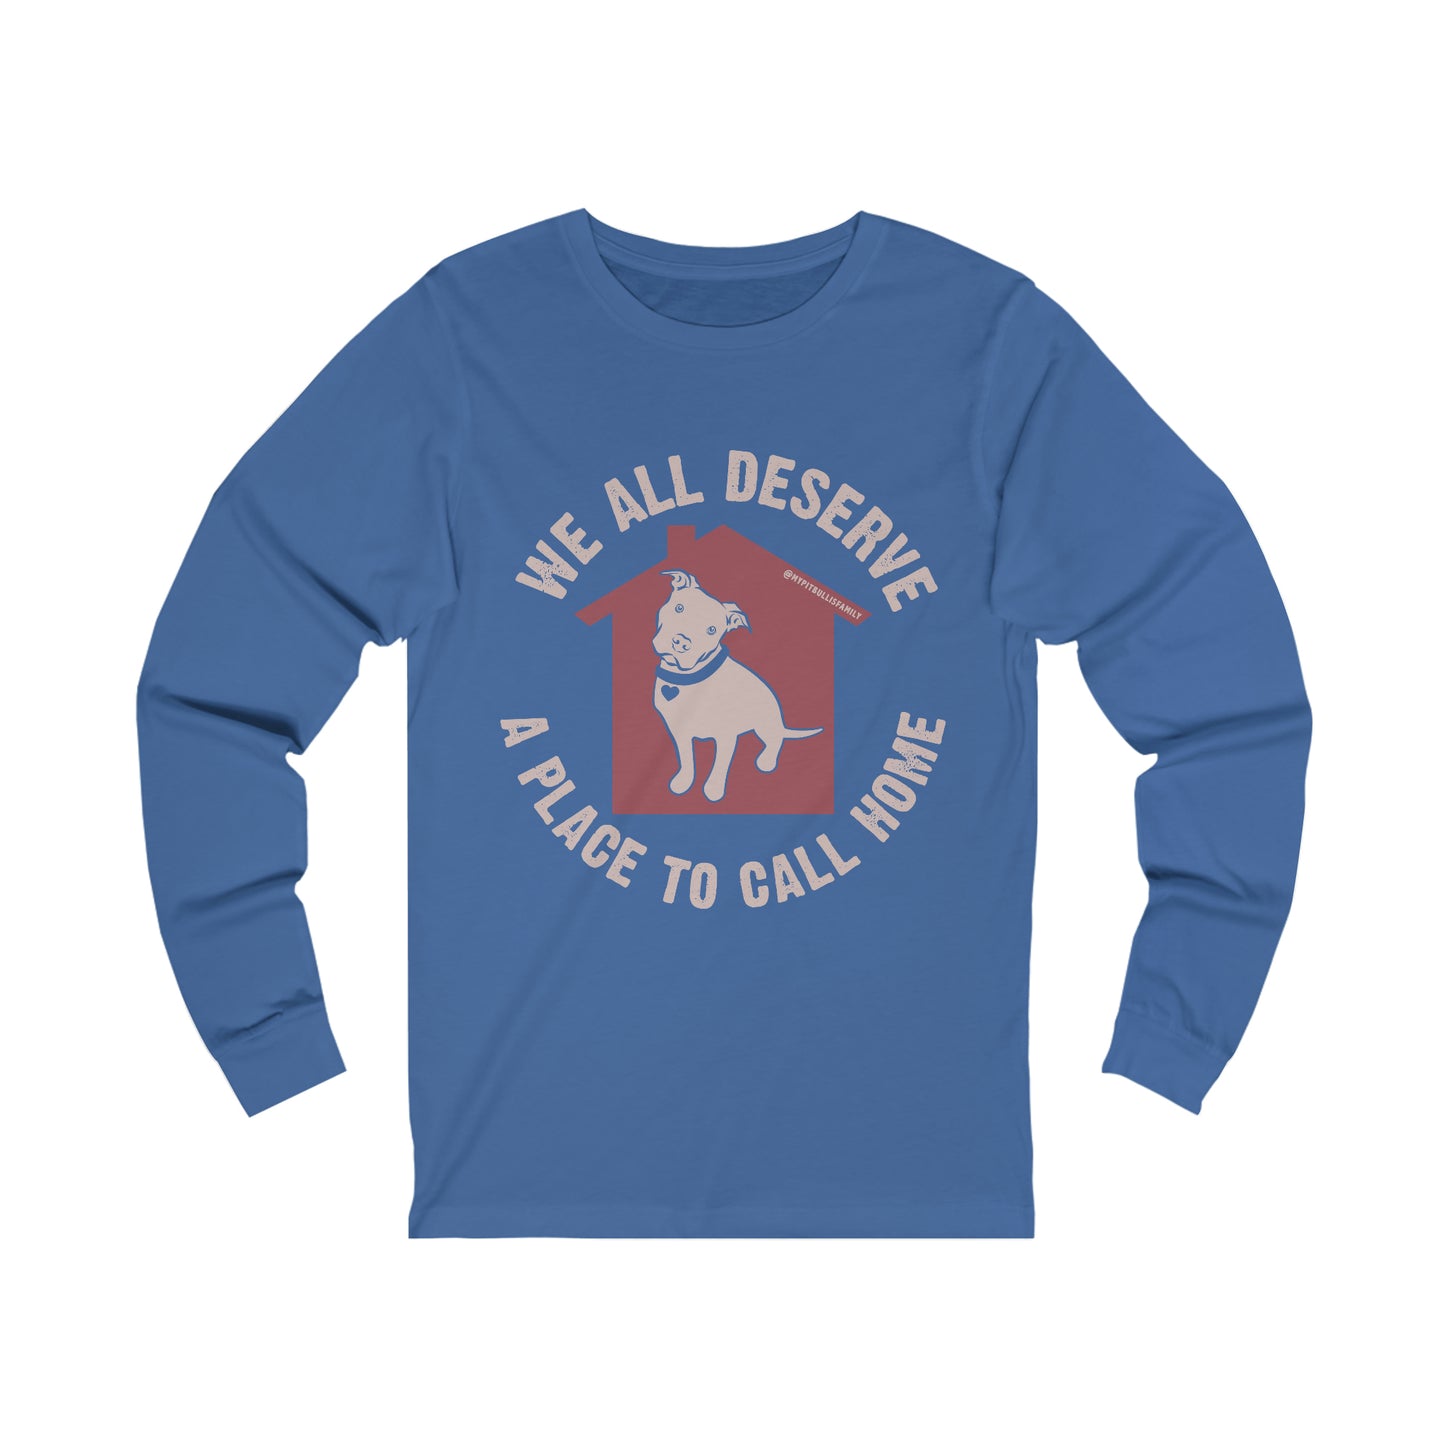 We All Deserve a Place to Call Home Unisex Jersey Long Sleeve Tee